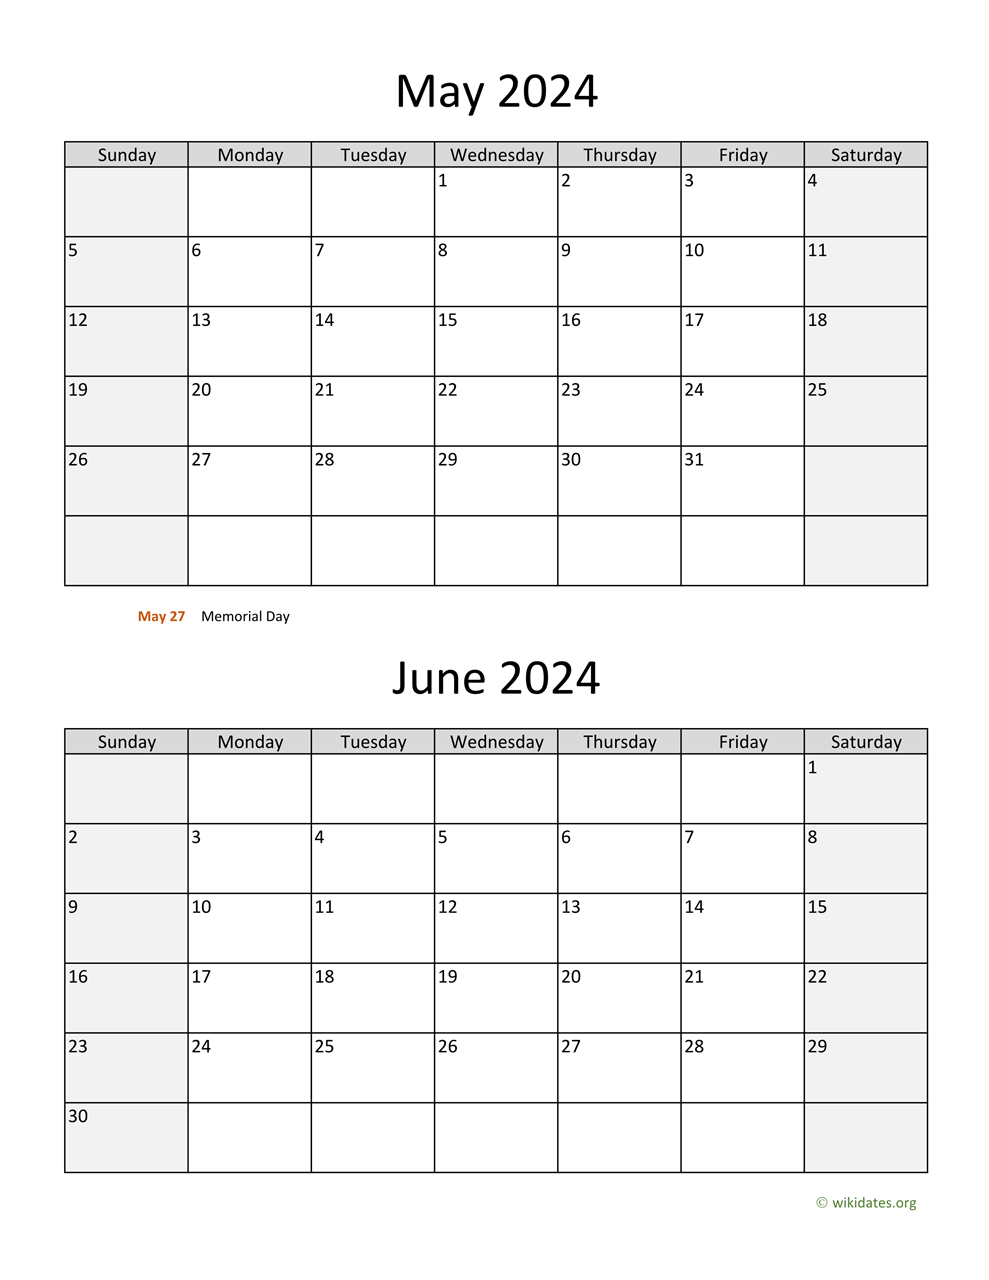 May And June 2024 Calendar | Wikidates for May And June 2024 Calendar Printable